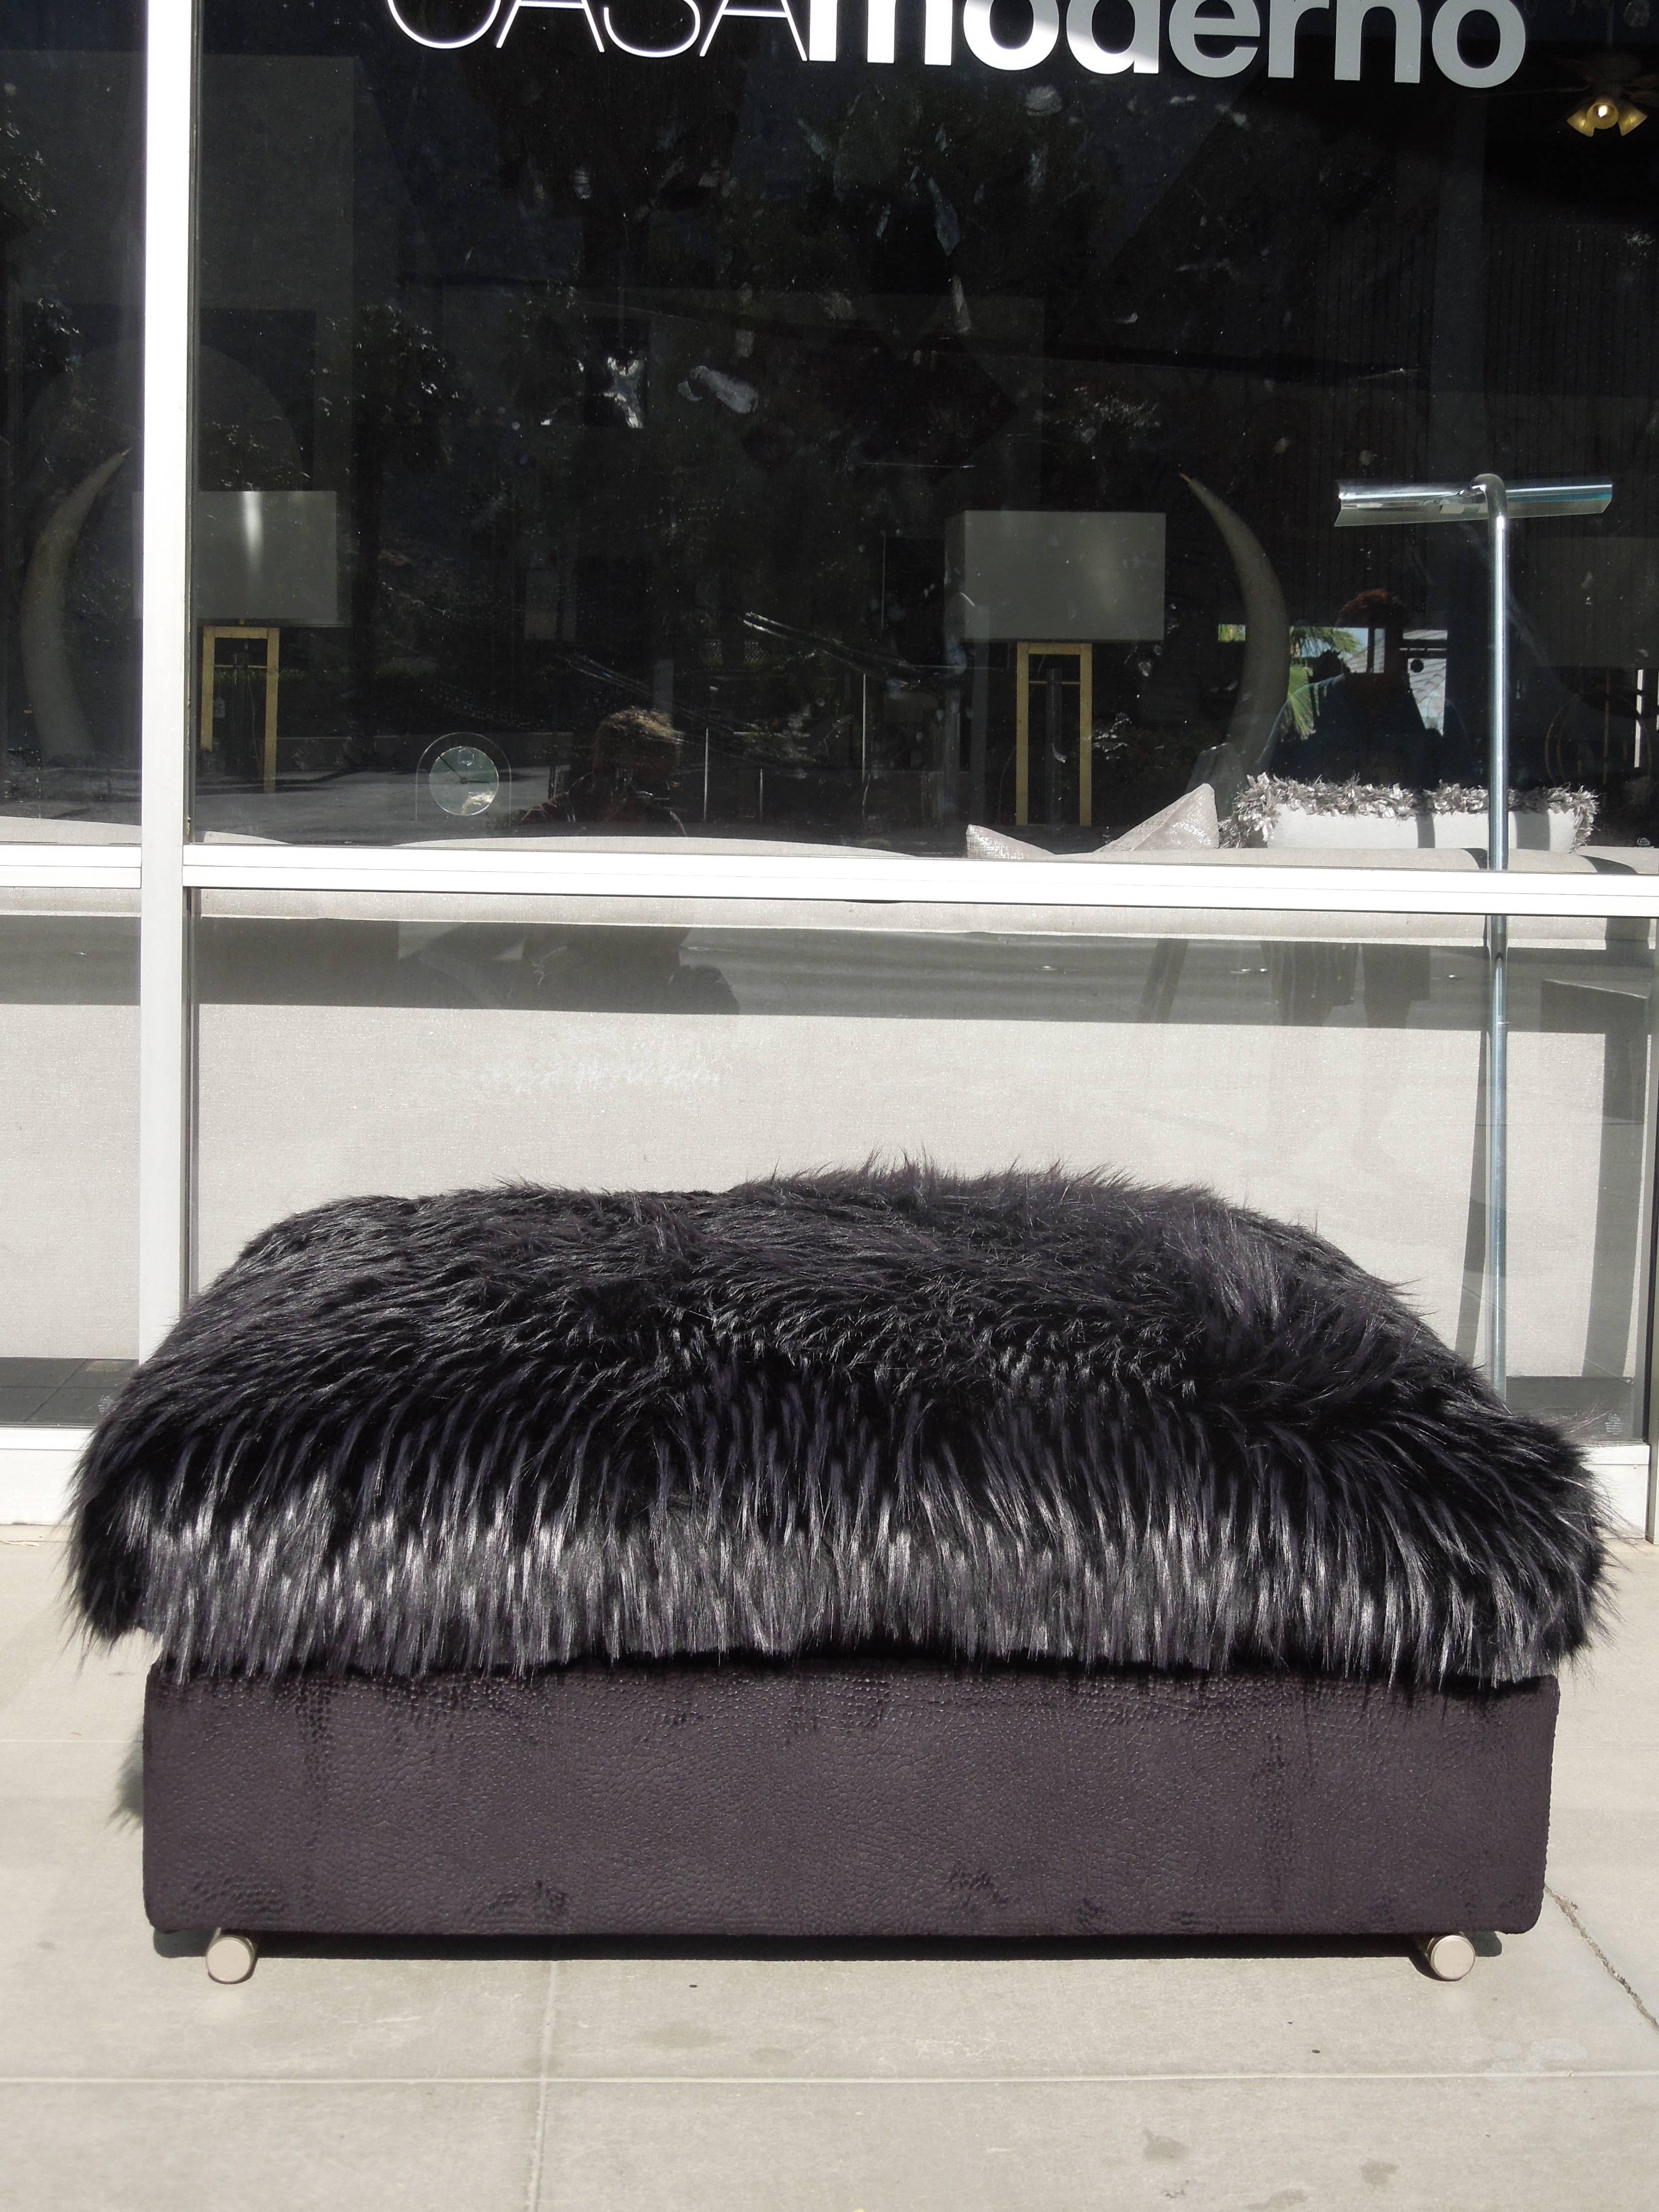 A very chic and modern Italian ottoman newly upholstered (in California) in a textured faux suede jacquard base with a very high end European faux fur top cushion. The ottoman bases are modern silver nickel rods that are visible front and back. The